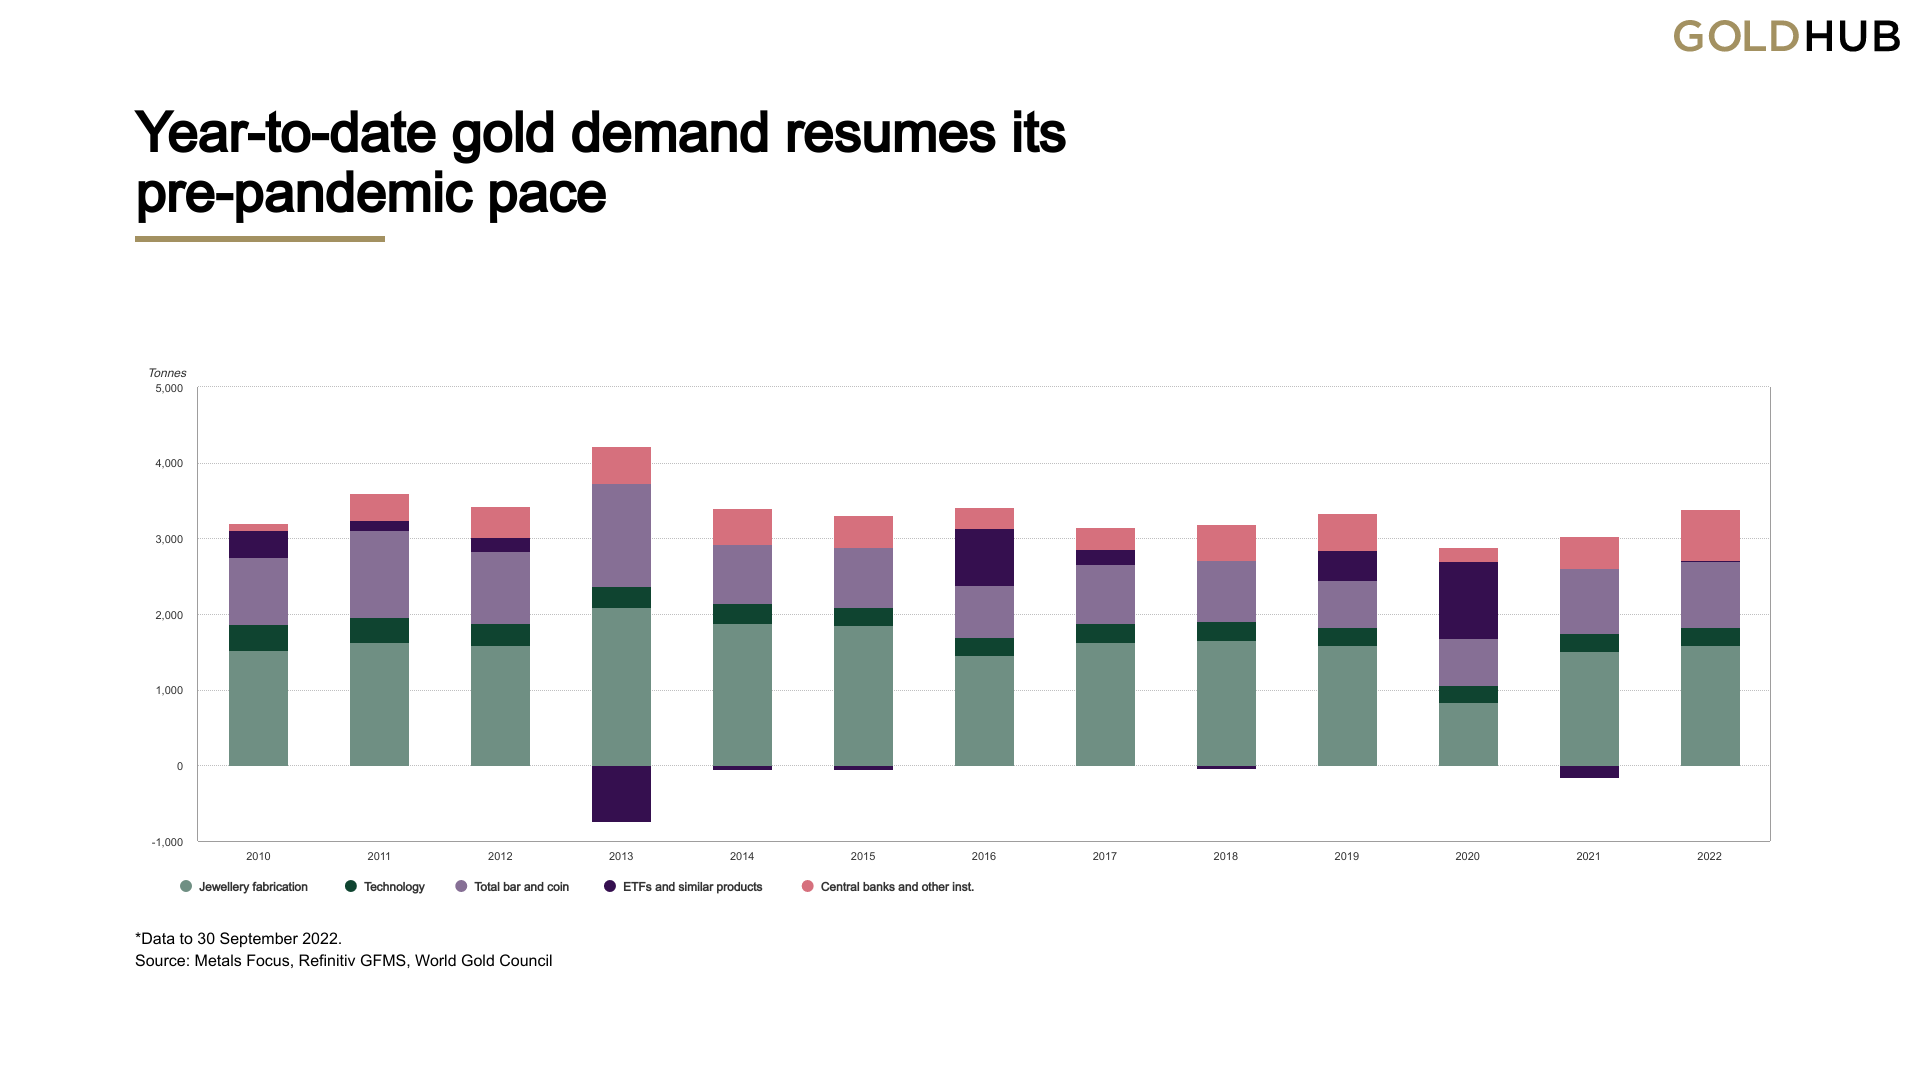 bar chart showing overall global gold demand year over year, best since 2013